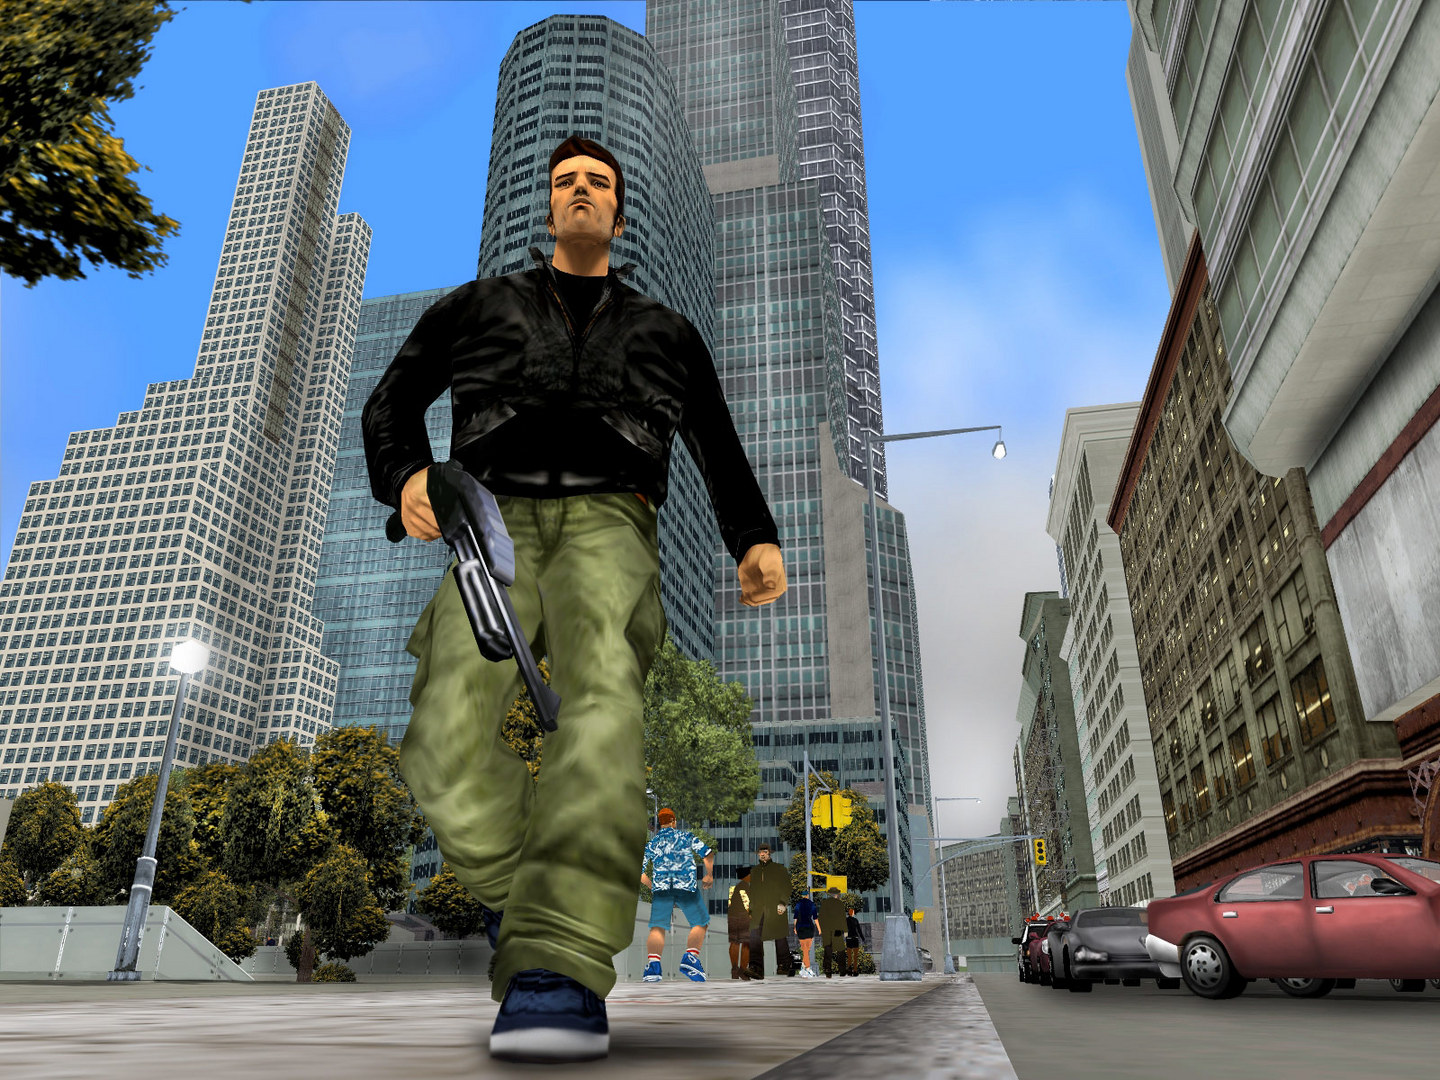 PSVita: Grand Theft Auto III port by Rinnegatamante & TheFlow released -  Performance pretty good staying above the 20FPS mark all the time! 